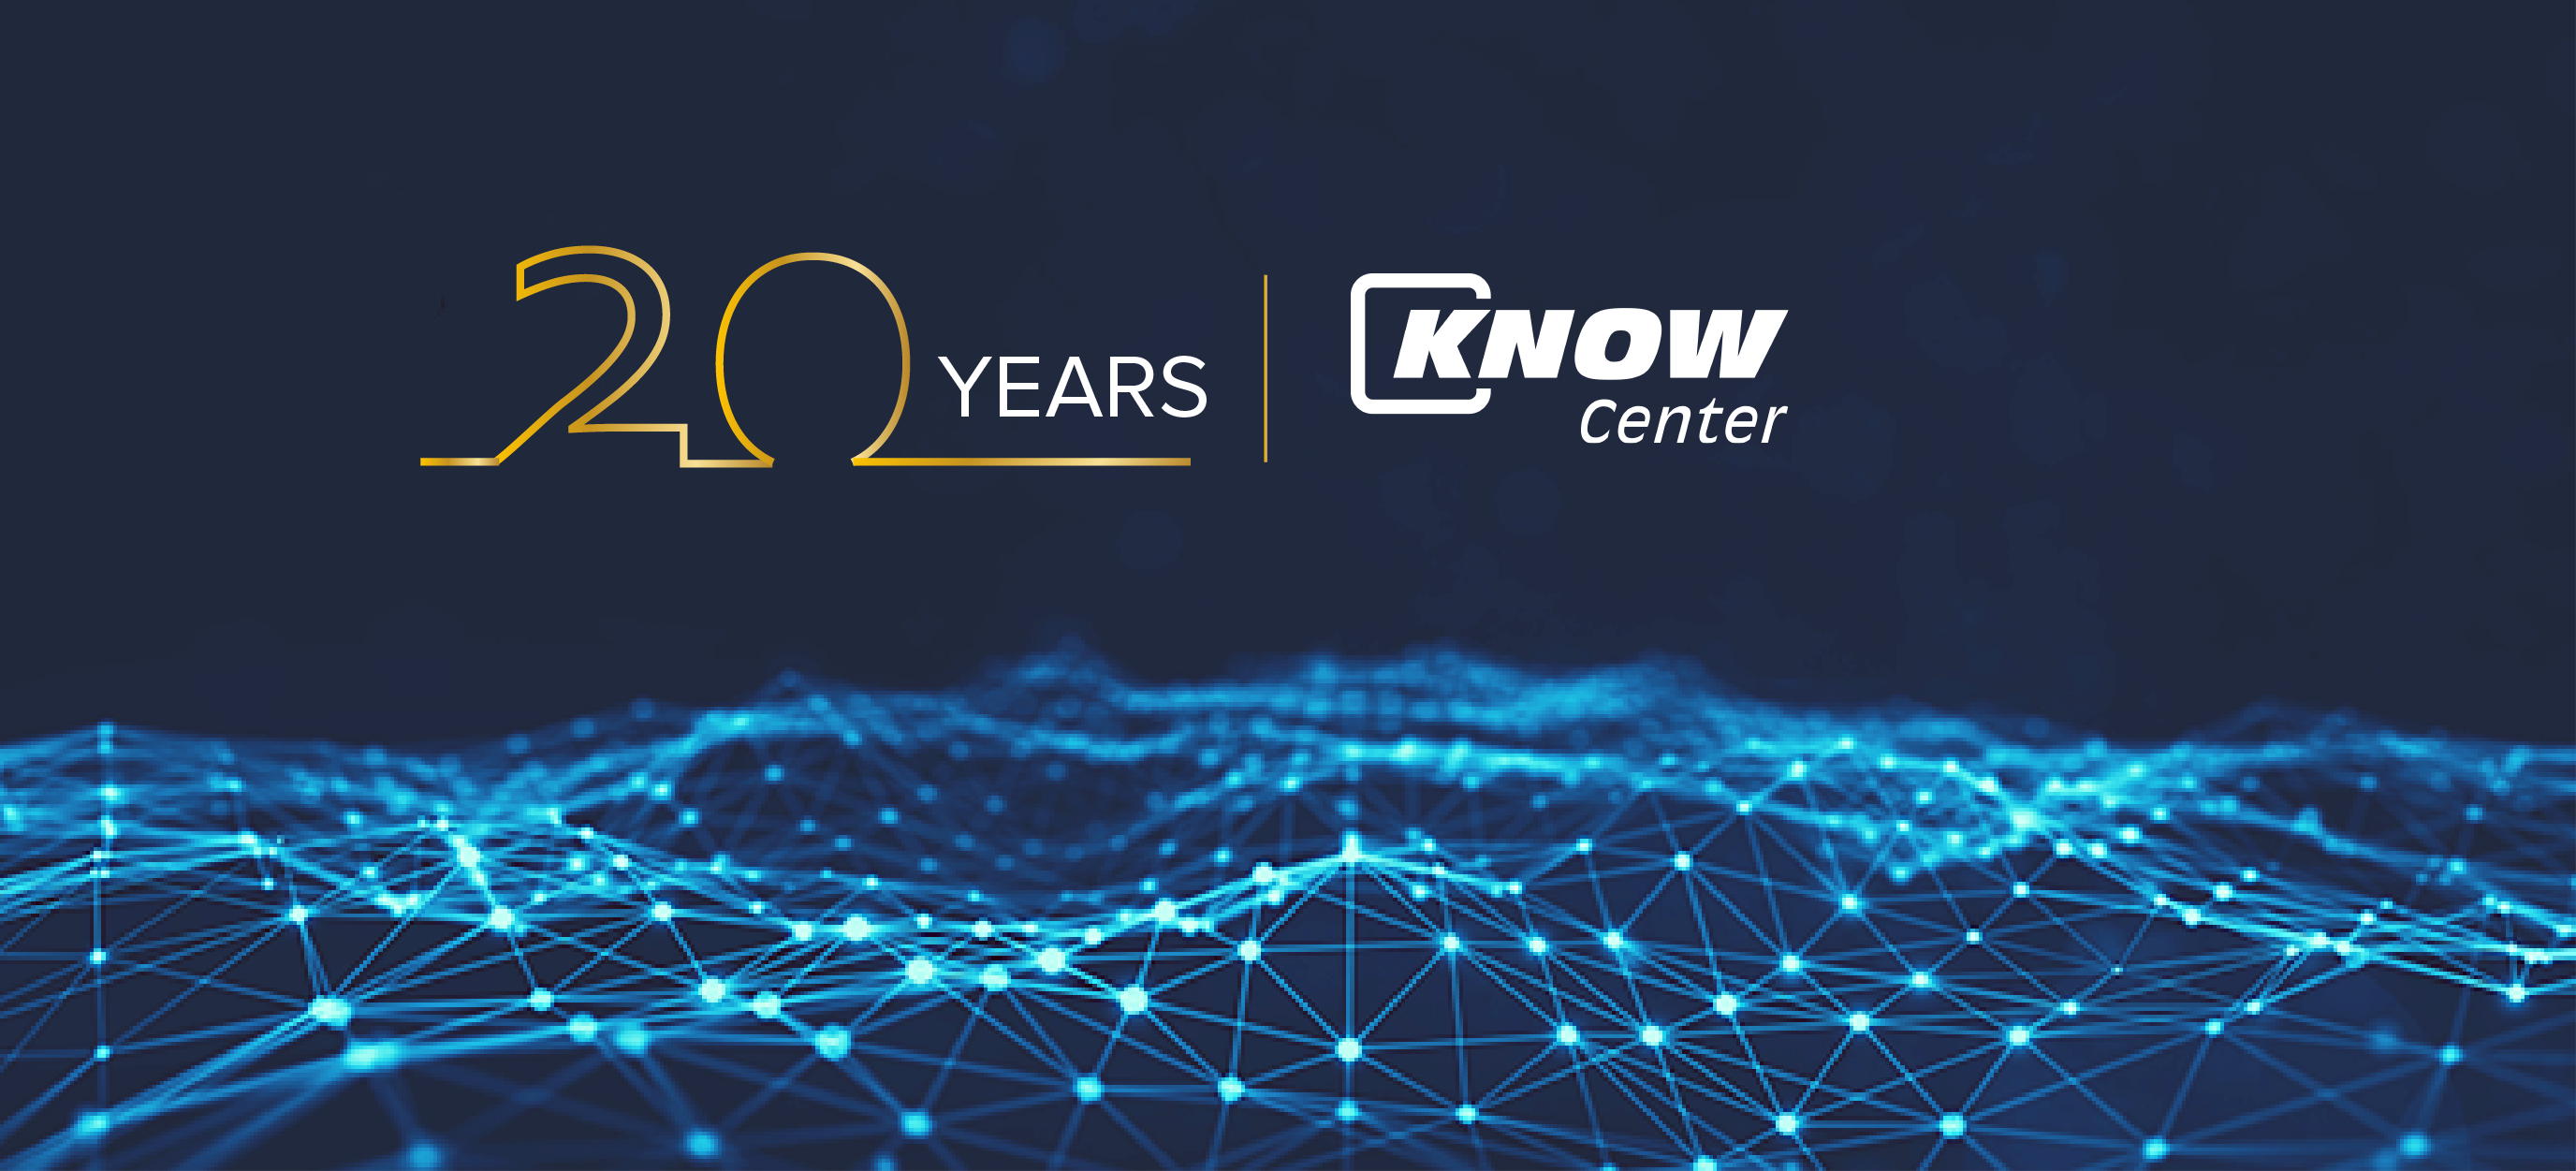 20 years of Know-Center